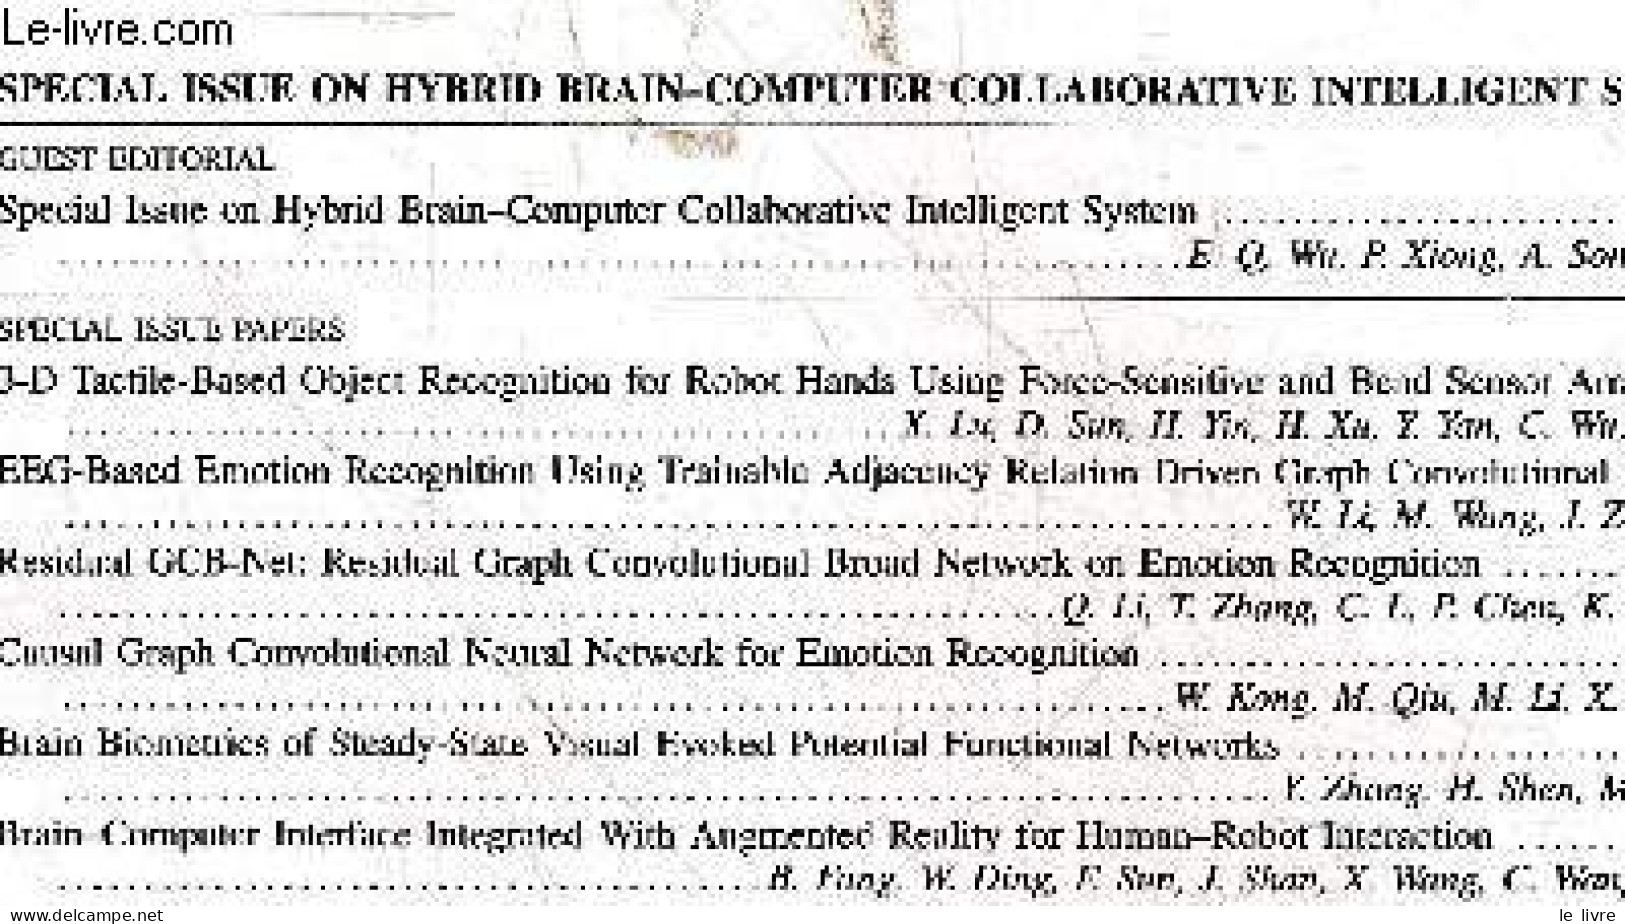 IEEE TRANSACTIONS ON COGNITIVE AND DEVELOPMENTAL SYSTEMS - DECEMBER 2023, VOLUME 15, N°4 - Special Issue On Hybrid Brain - Lingueística